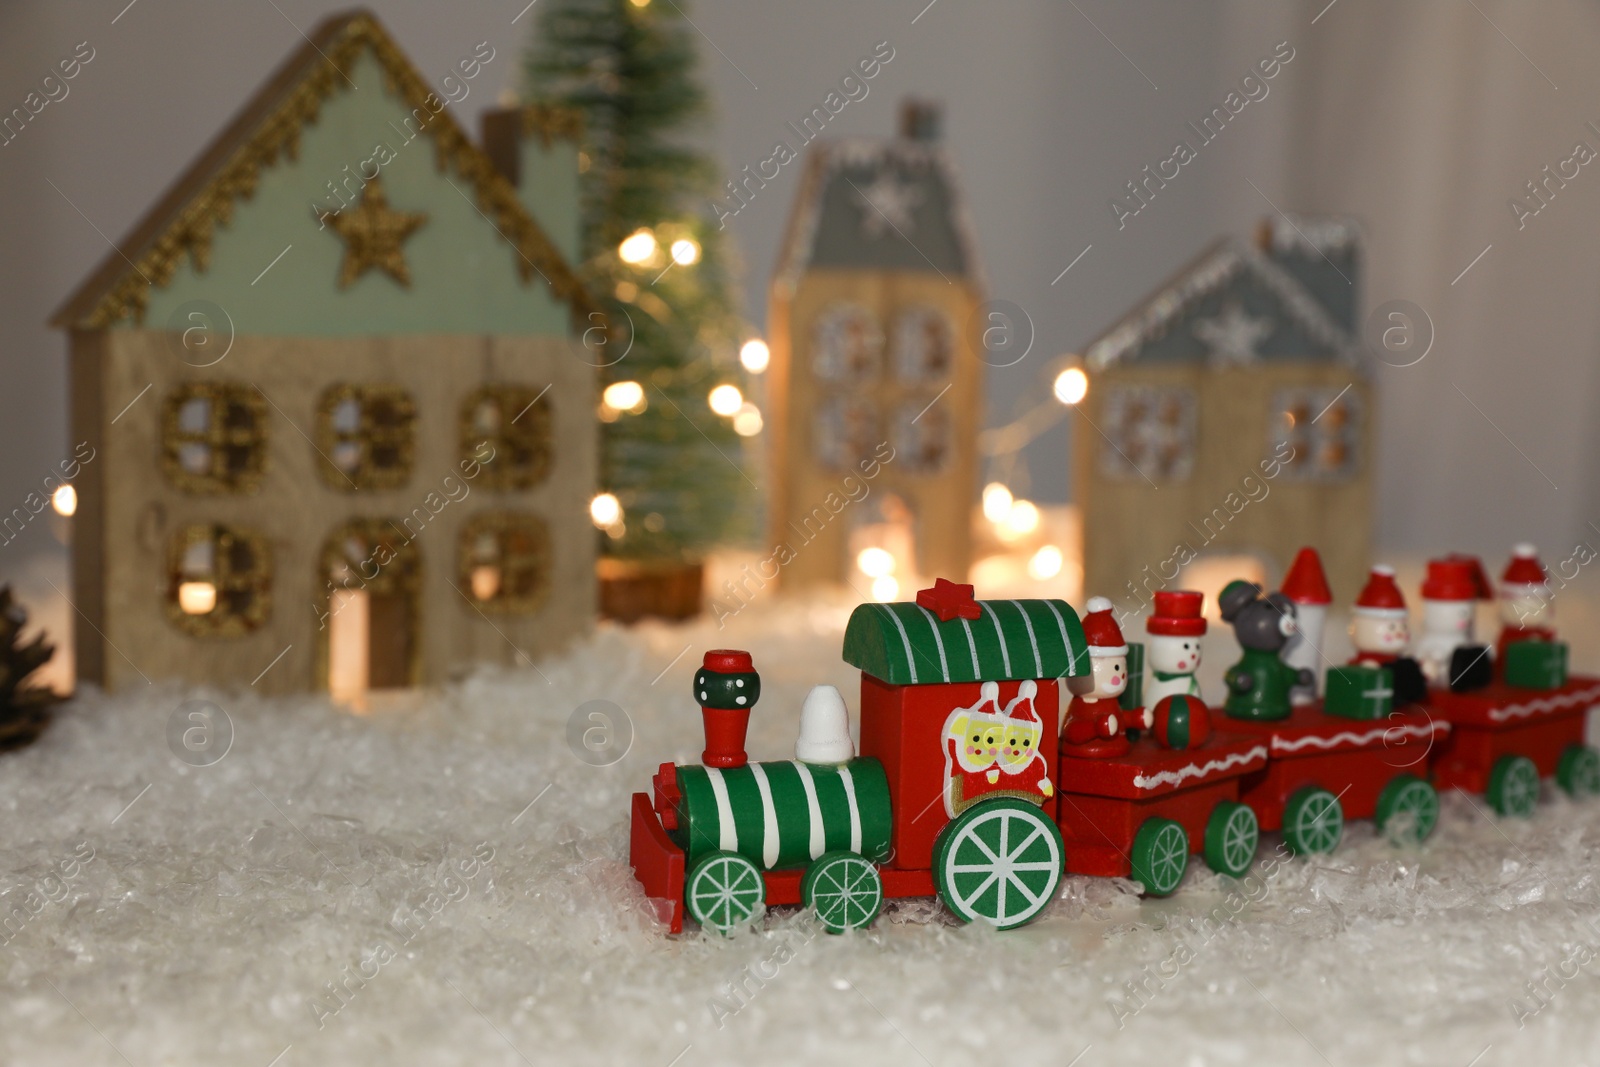 Photo of Bright toy train near decorative houses with Christmas lights on artificial snow